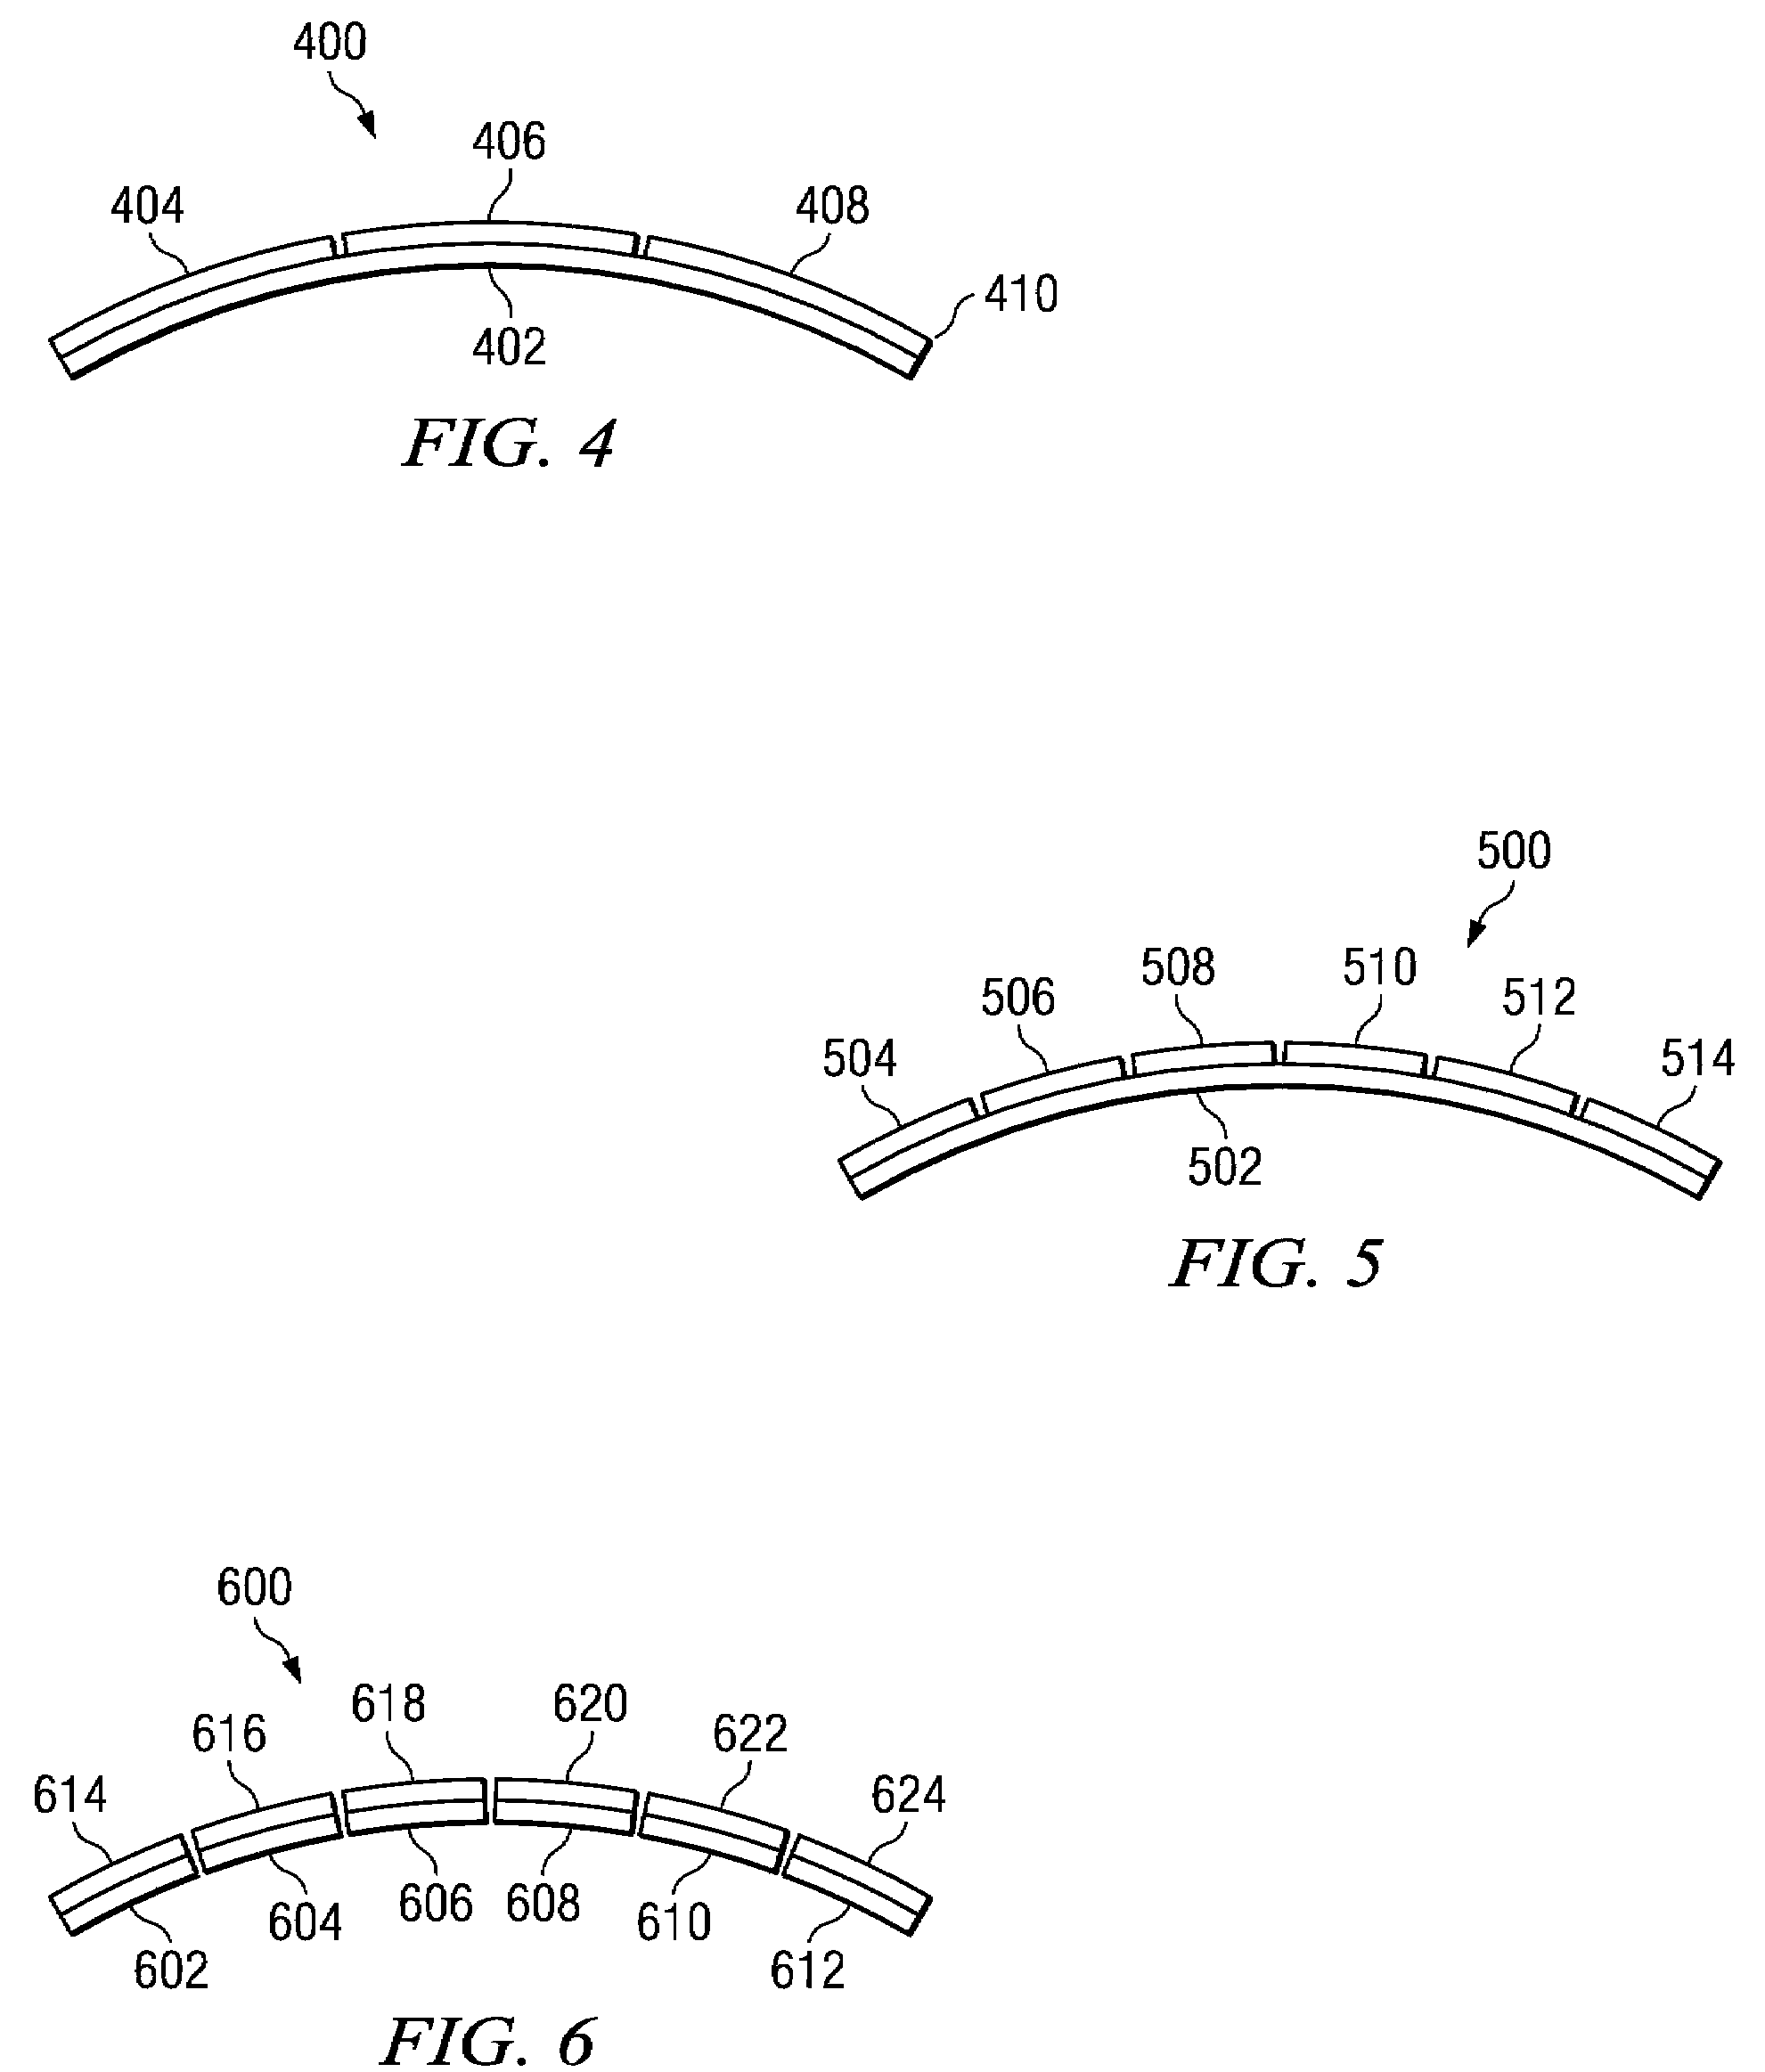 Curved focal plane receiver for concentrating light in a photovoltaic system